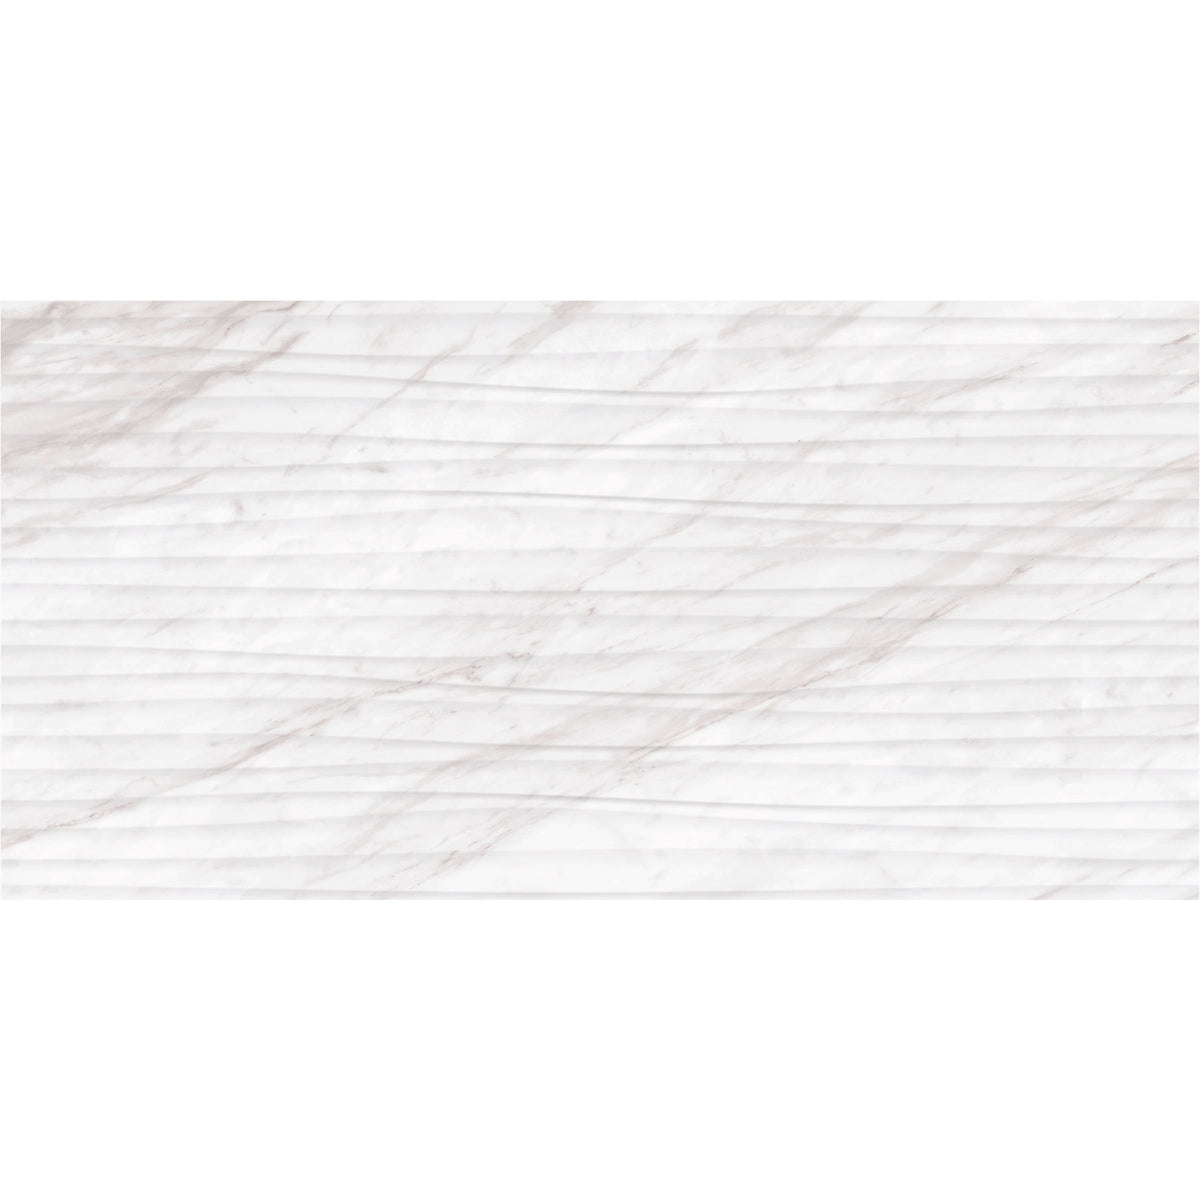 Daltile - Perpetuo - 12 in. x 24 in. Glazed Ceramic Wave Wall Tile - Timeless White 3